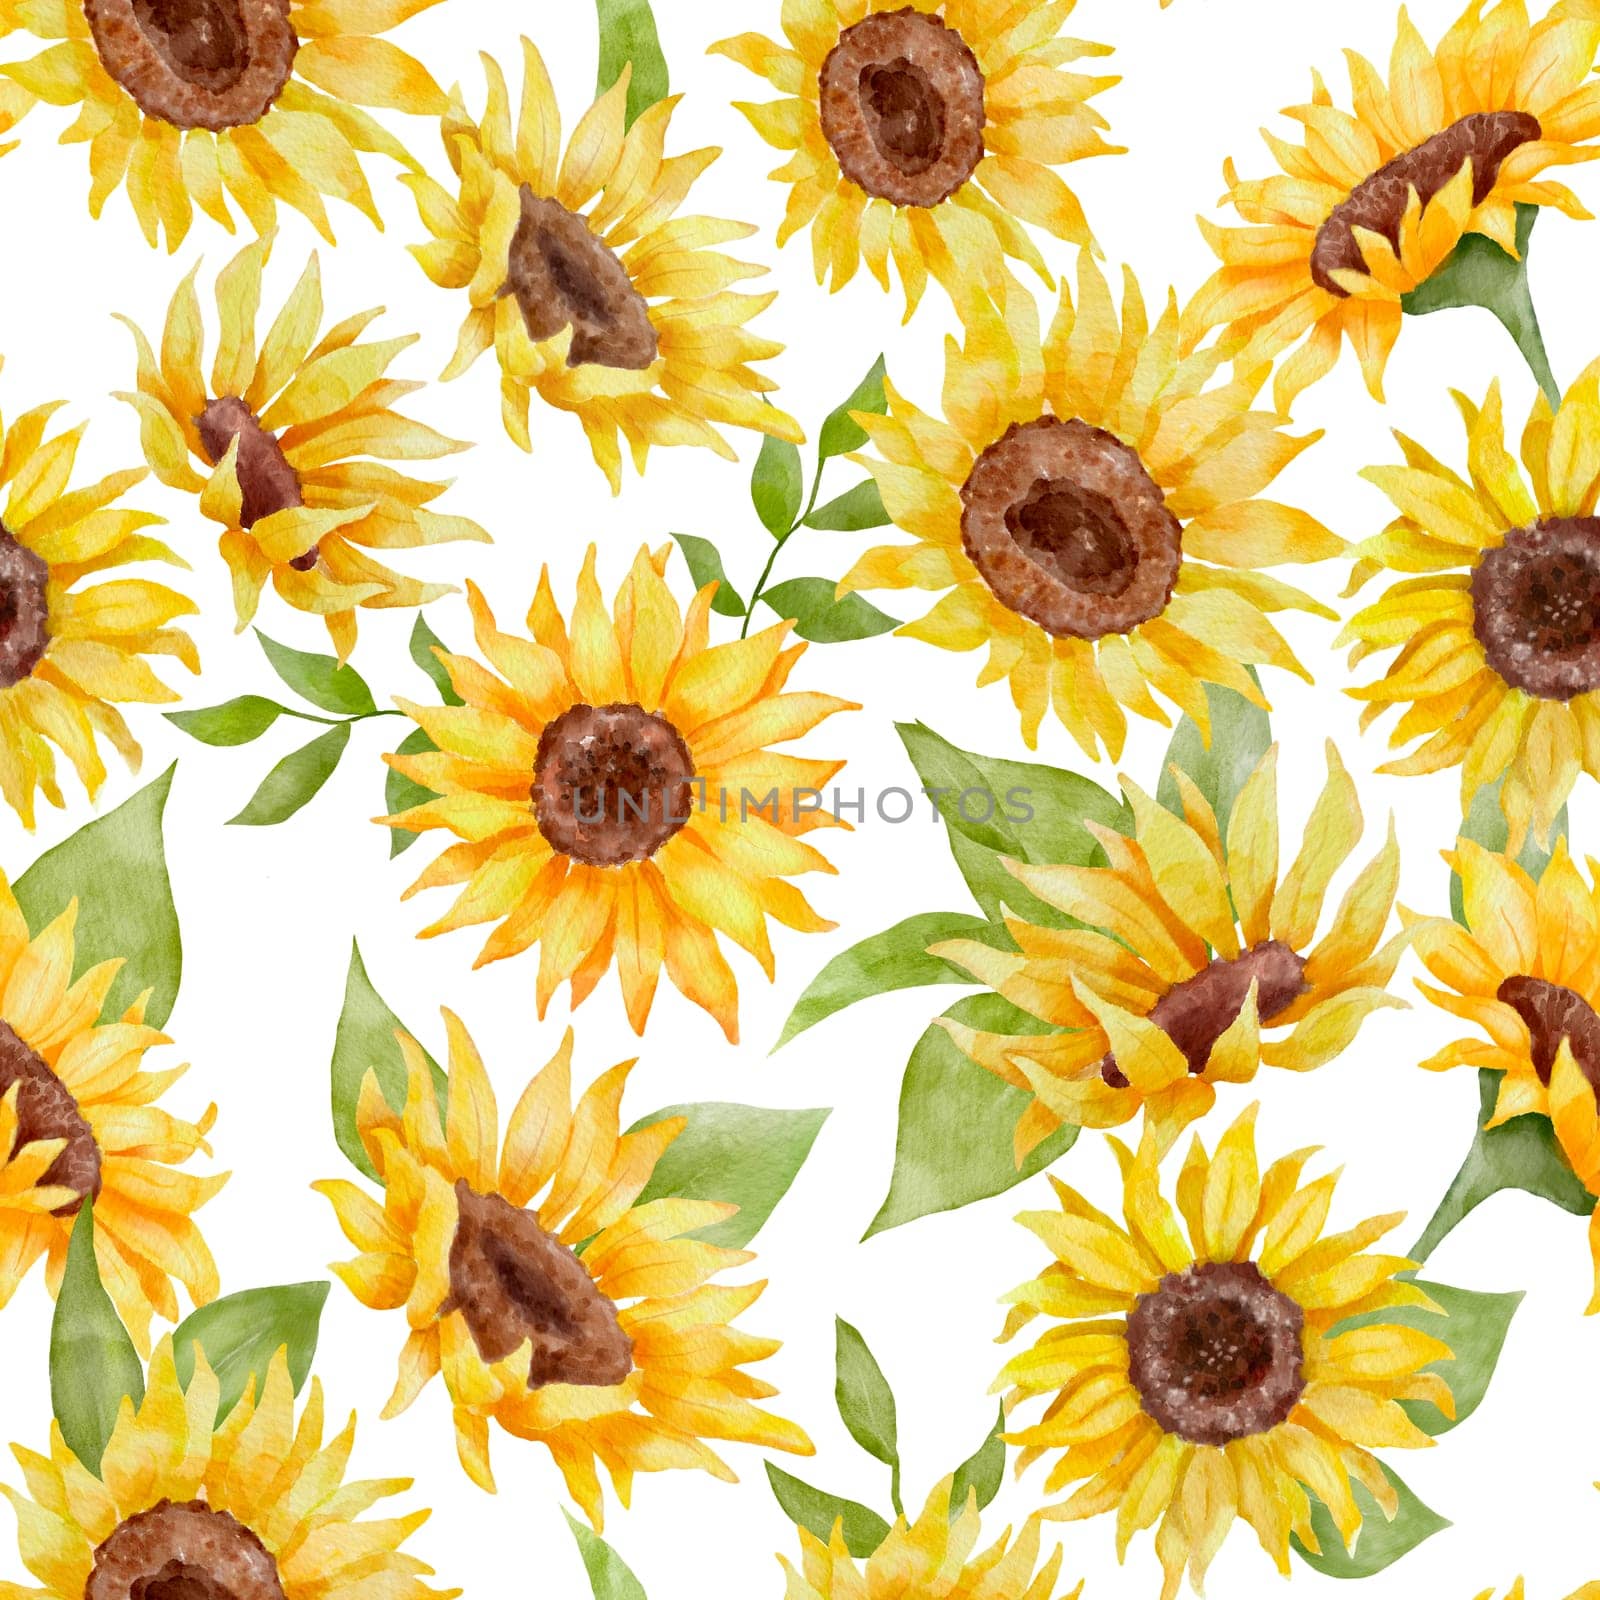 Floral seamless watercolor pattern with sunflowers and leaves on white background. Romantic summer hand drawn background